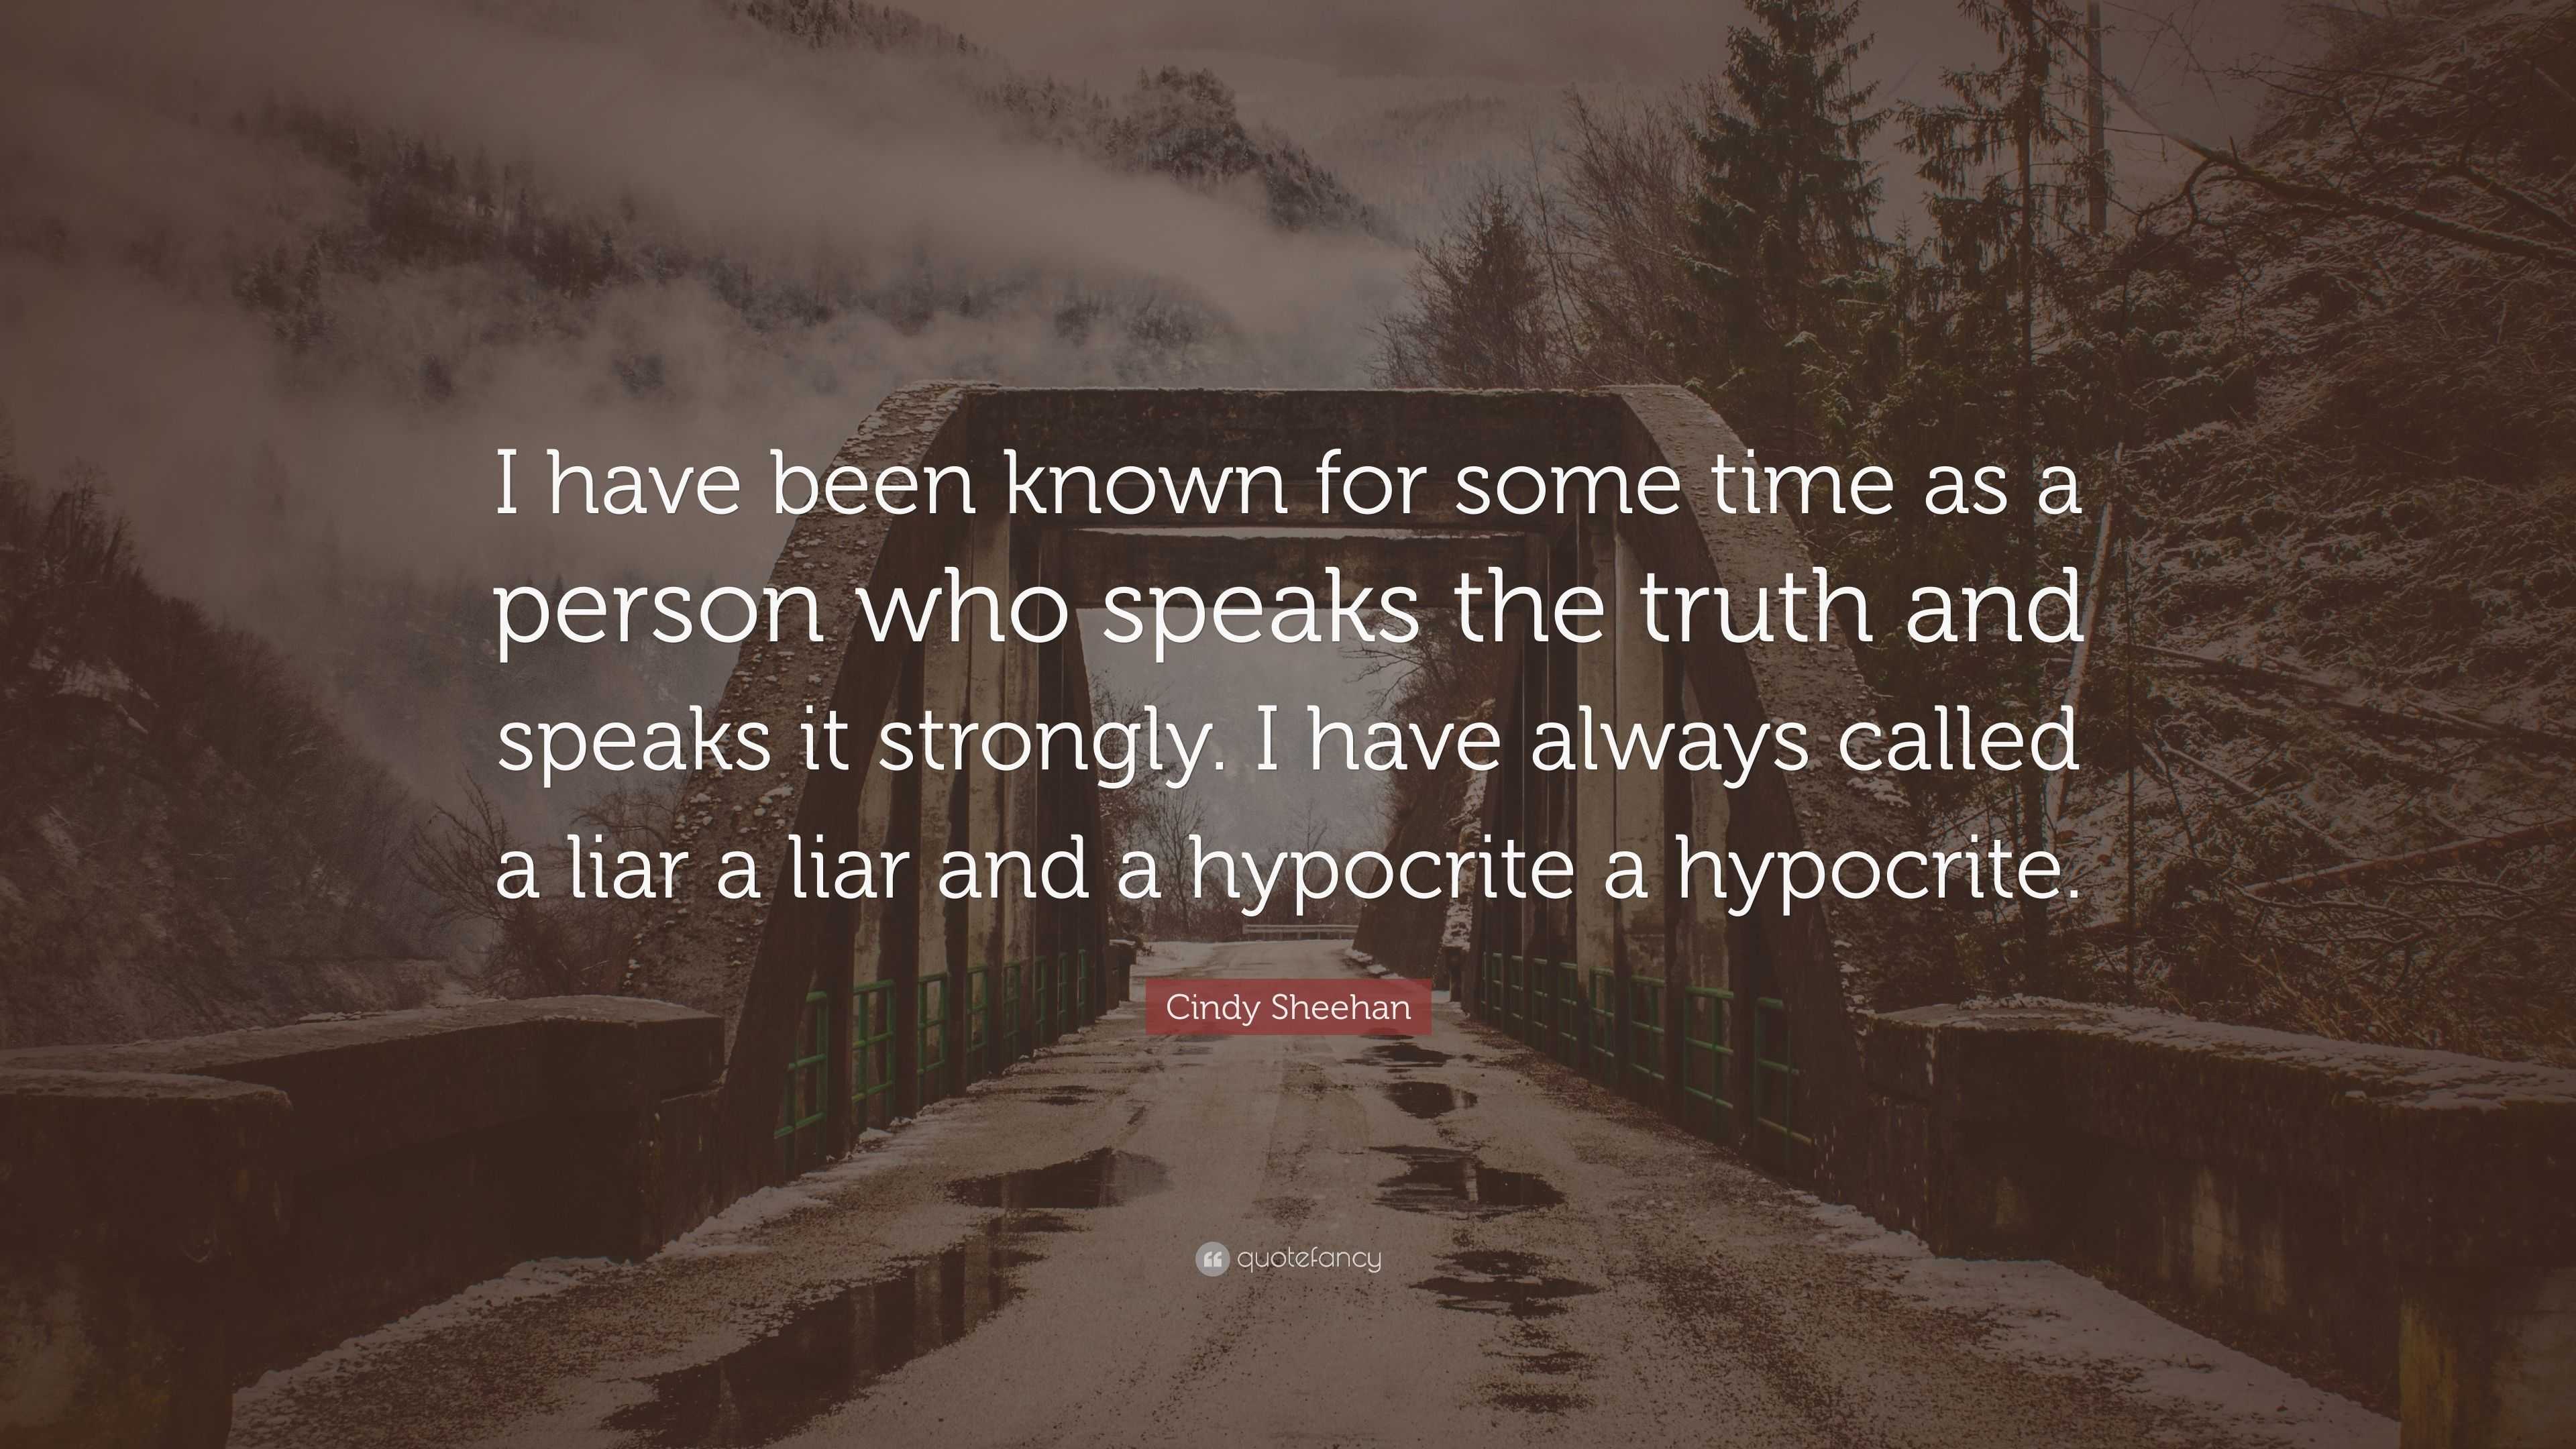 Cindy Sheehan Quote: “I have been known for some time as a person who ...